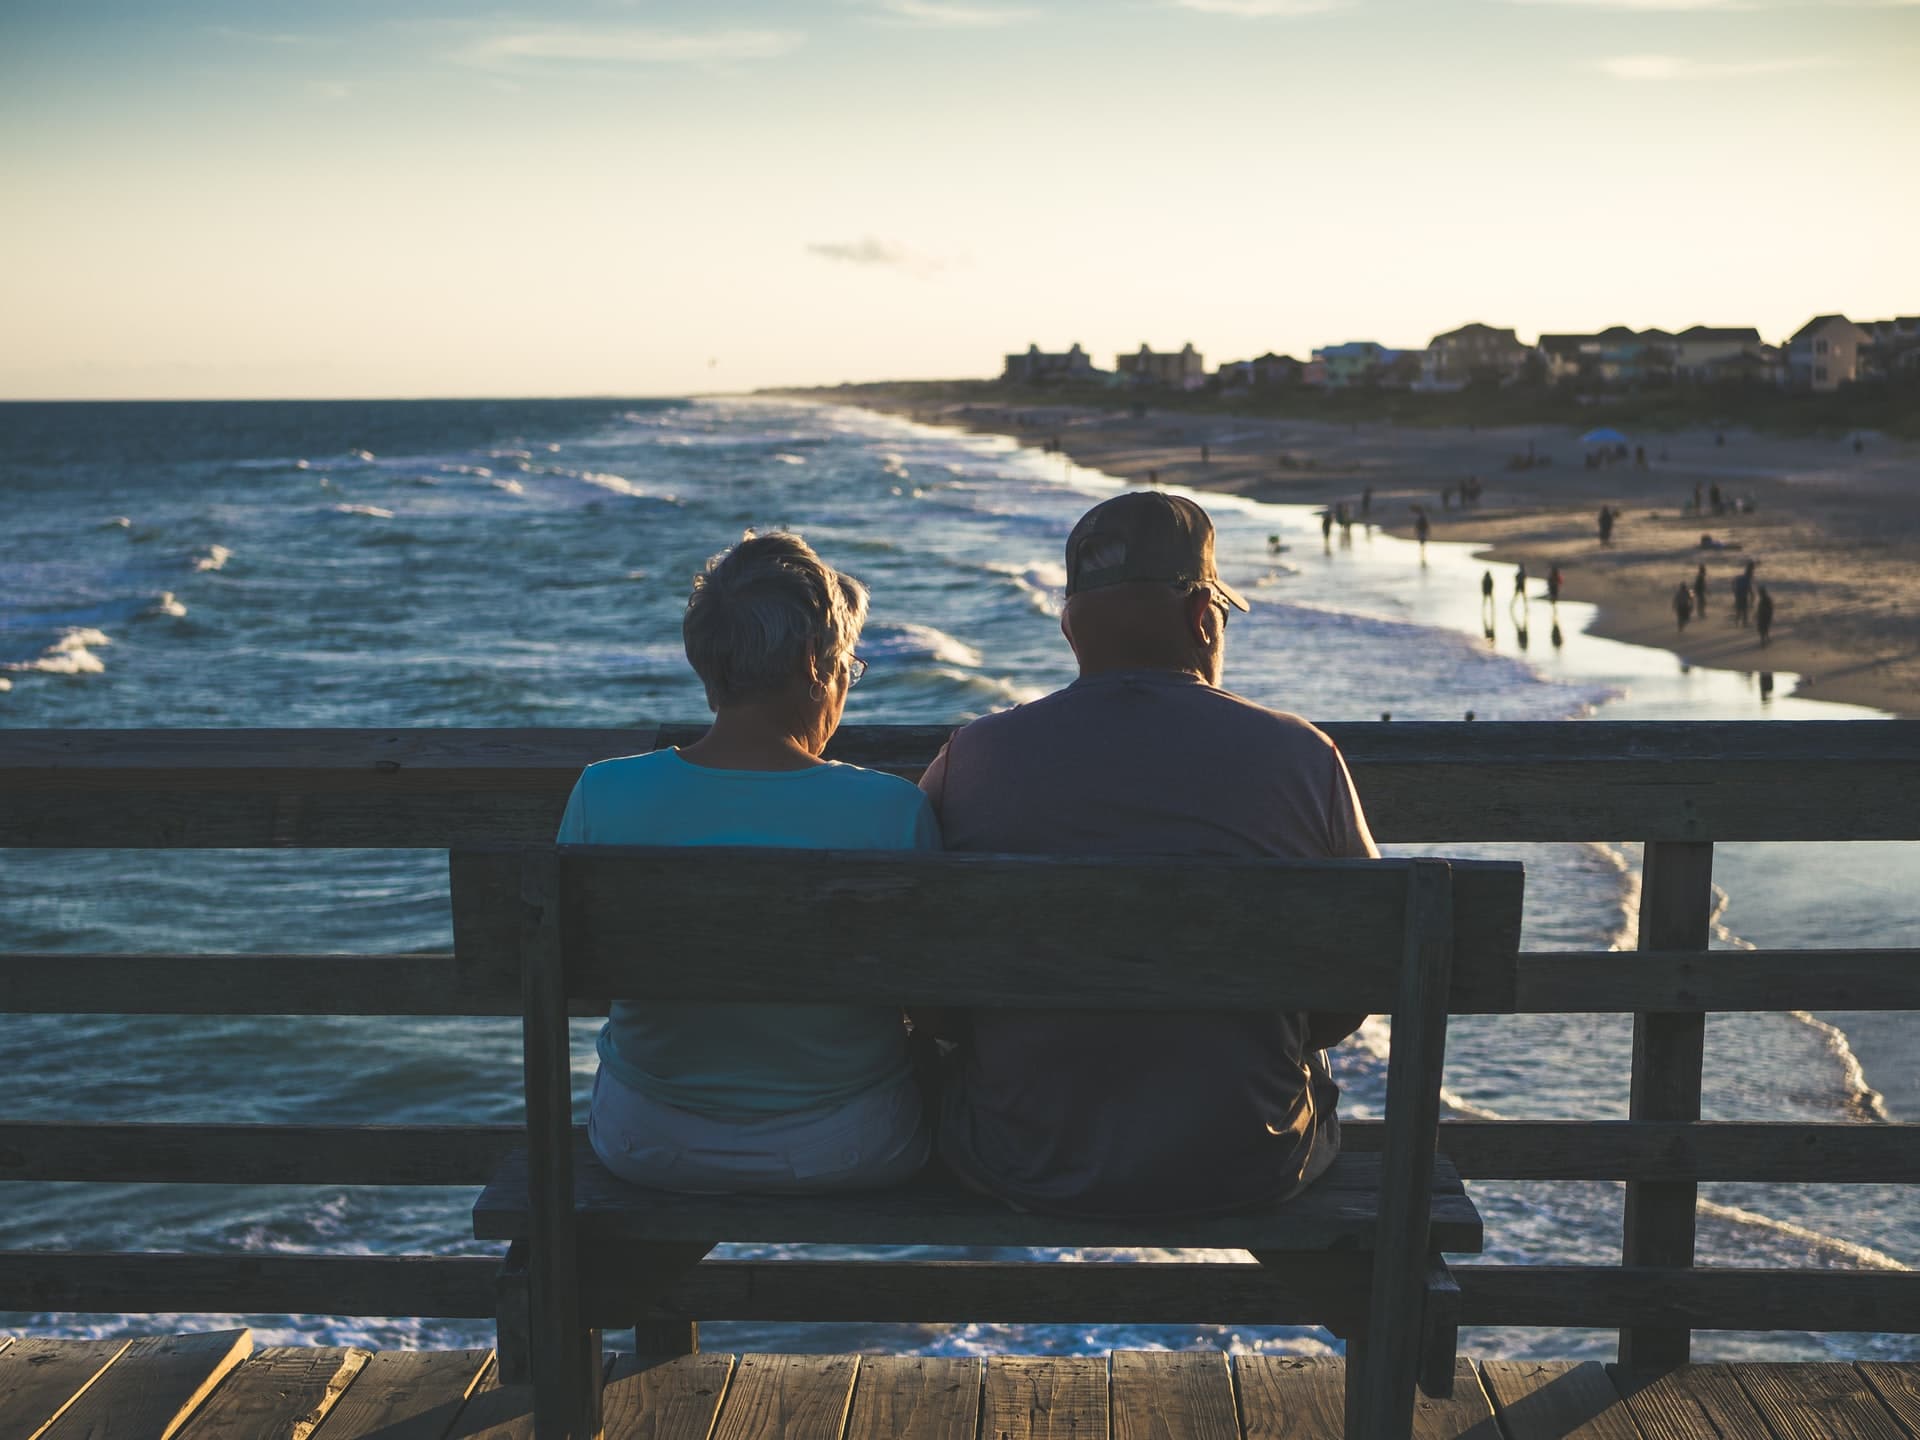 A man and woman sitting on a bench overlooking the beautiful Emerald Isle beach, North Carolina, USA - Photo by James Hose Jr on Unsplash